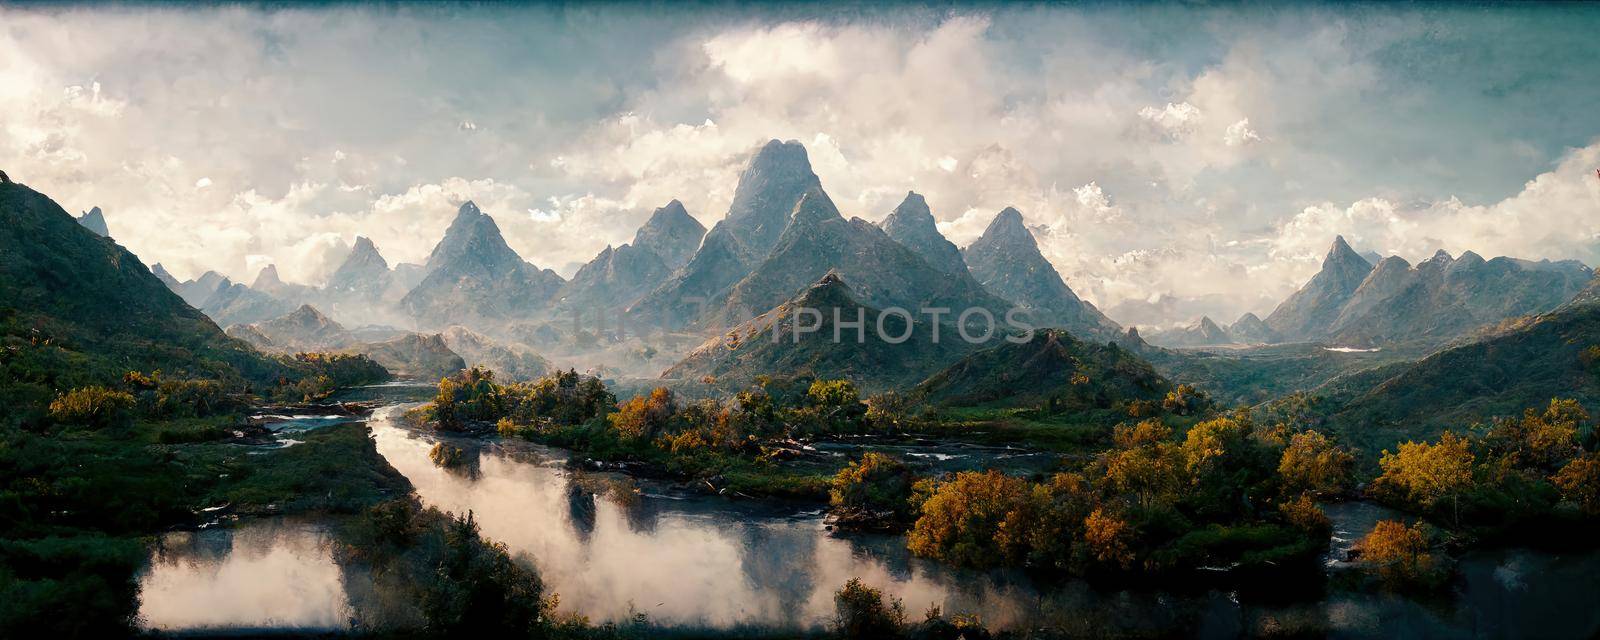 fairy tale valley in fantasy style with a wide river and mountains by TRMK